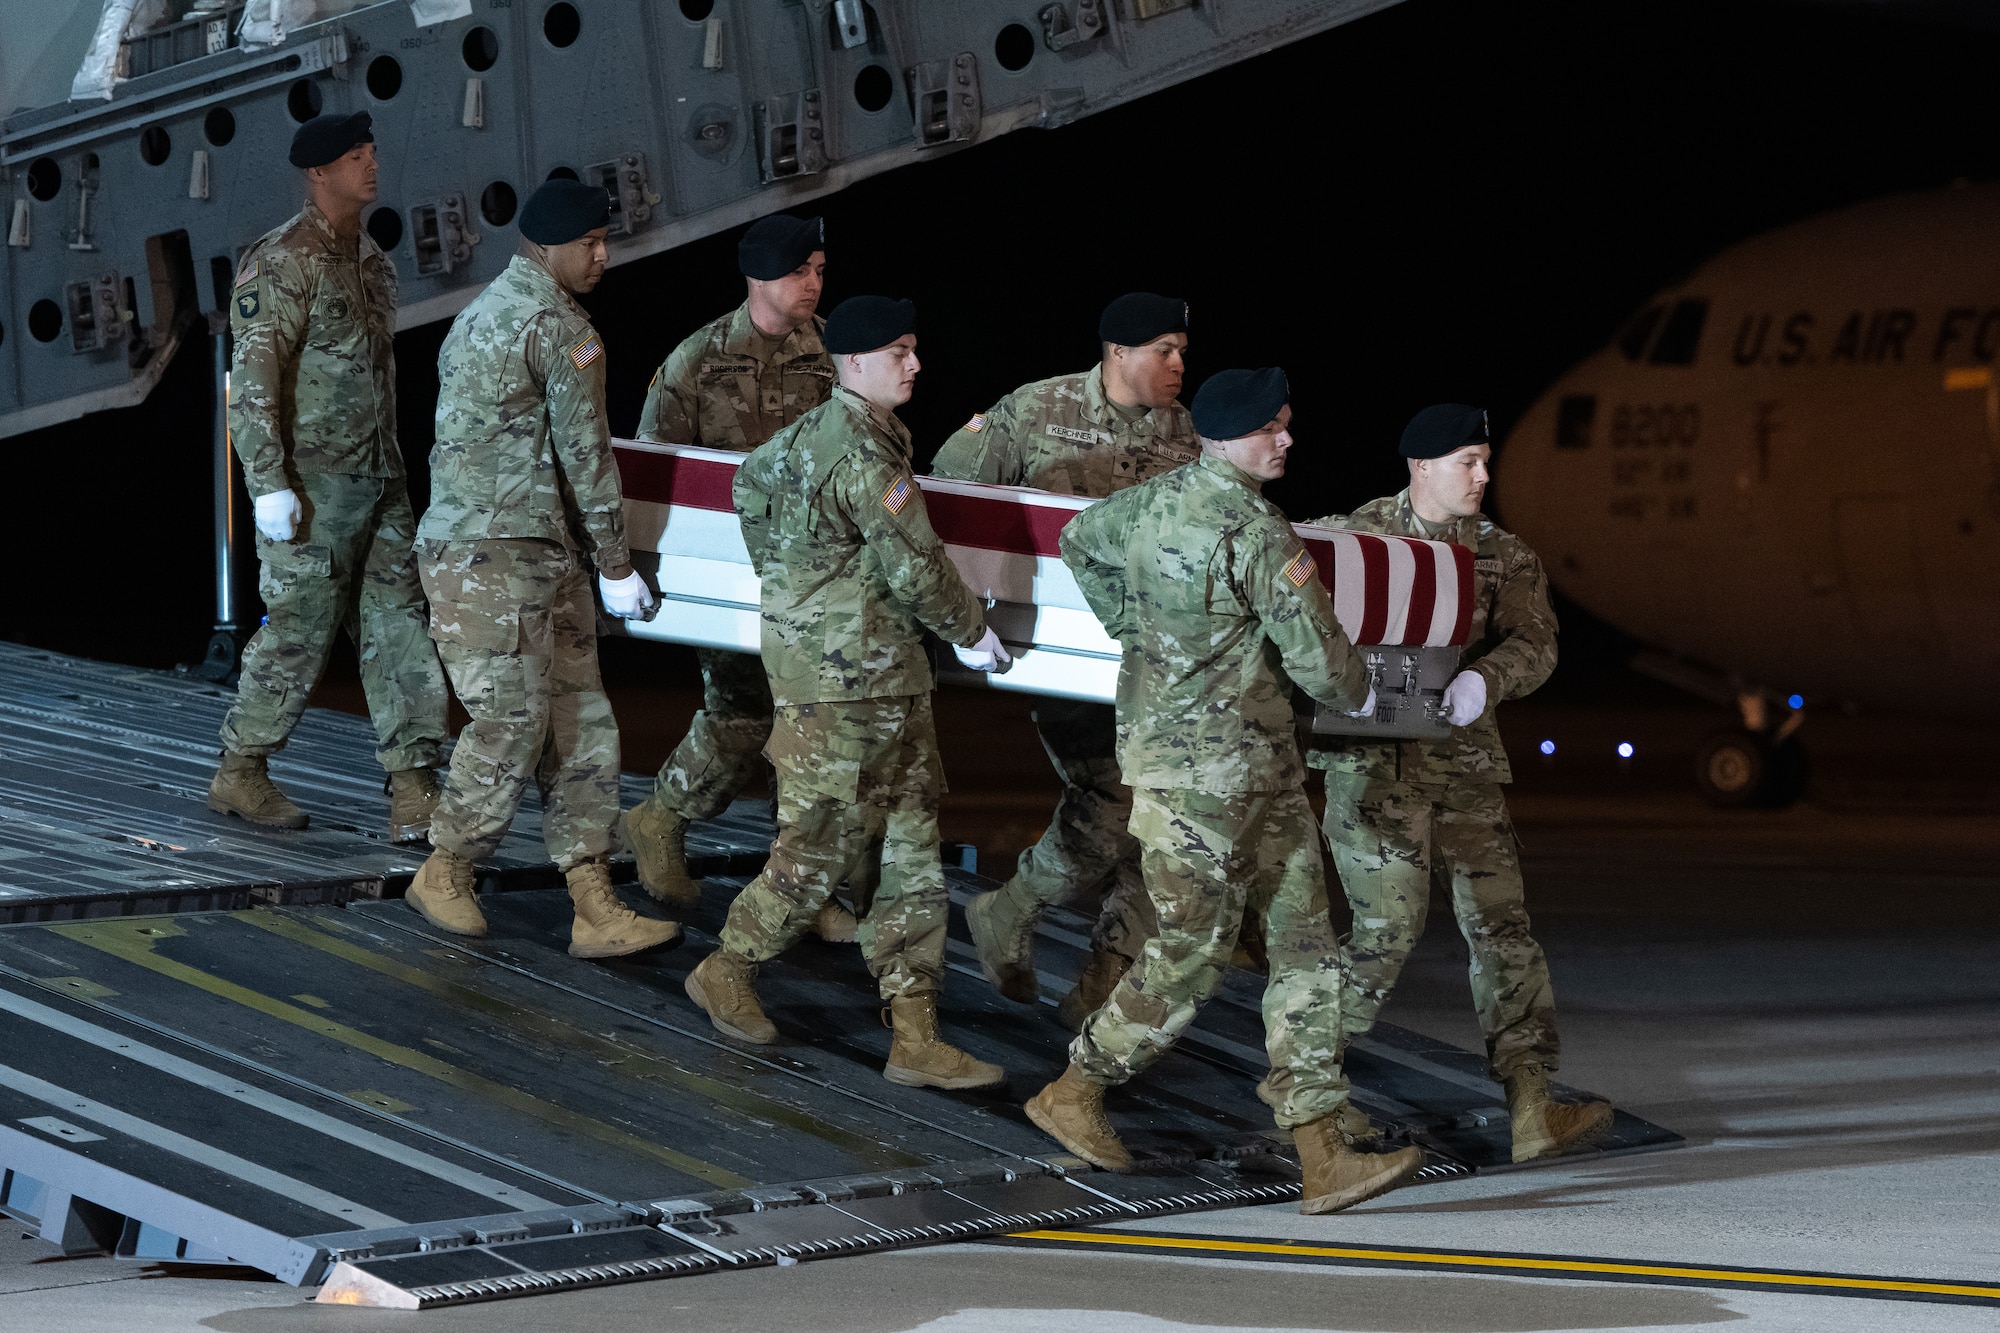 Dignified transfer for Army Staff Sgt. Tanner W. Grone